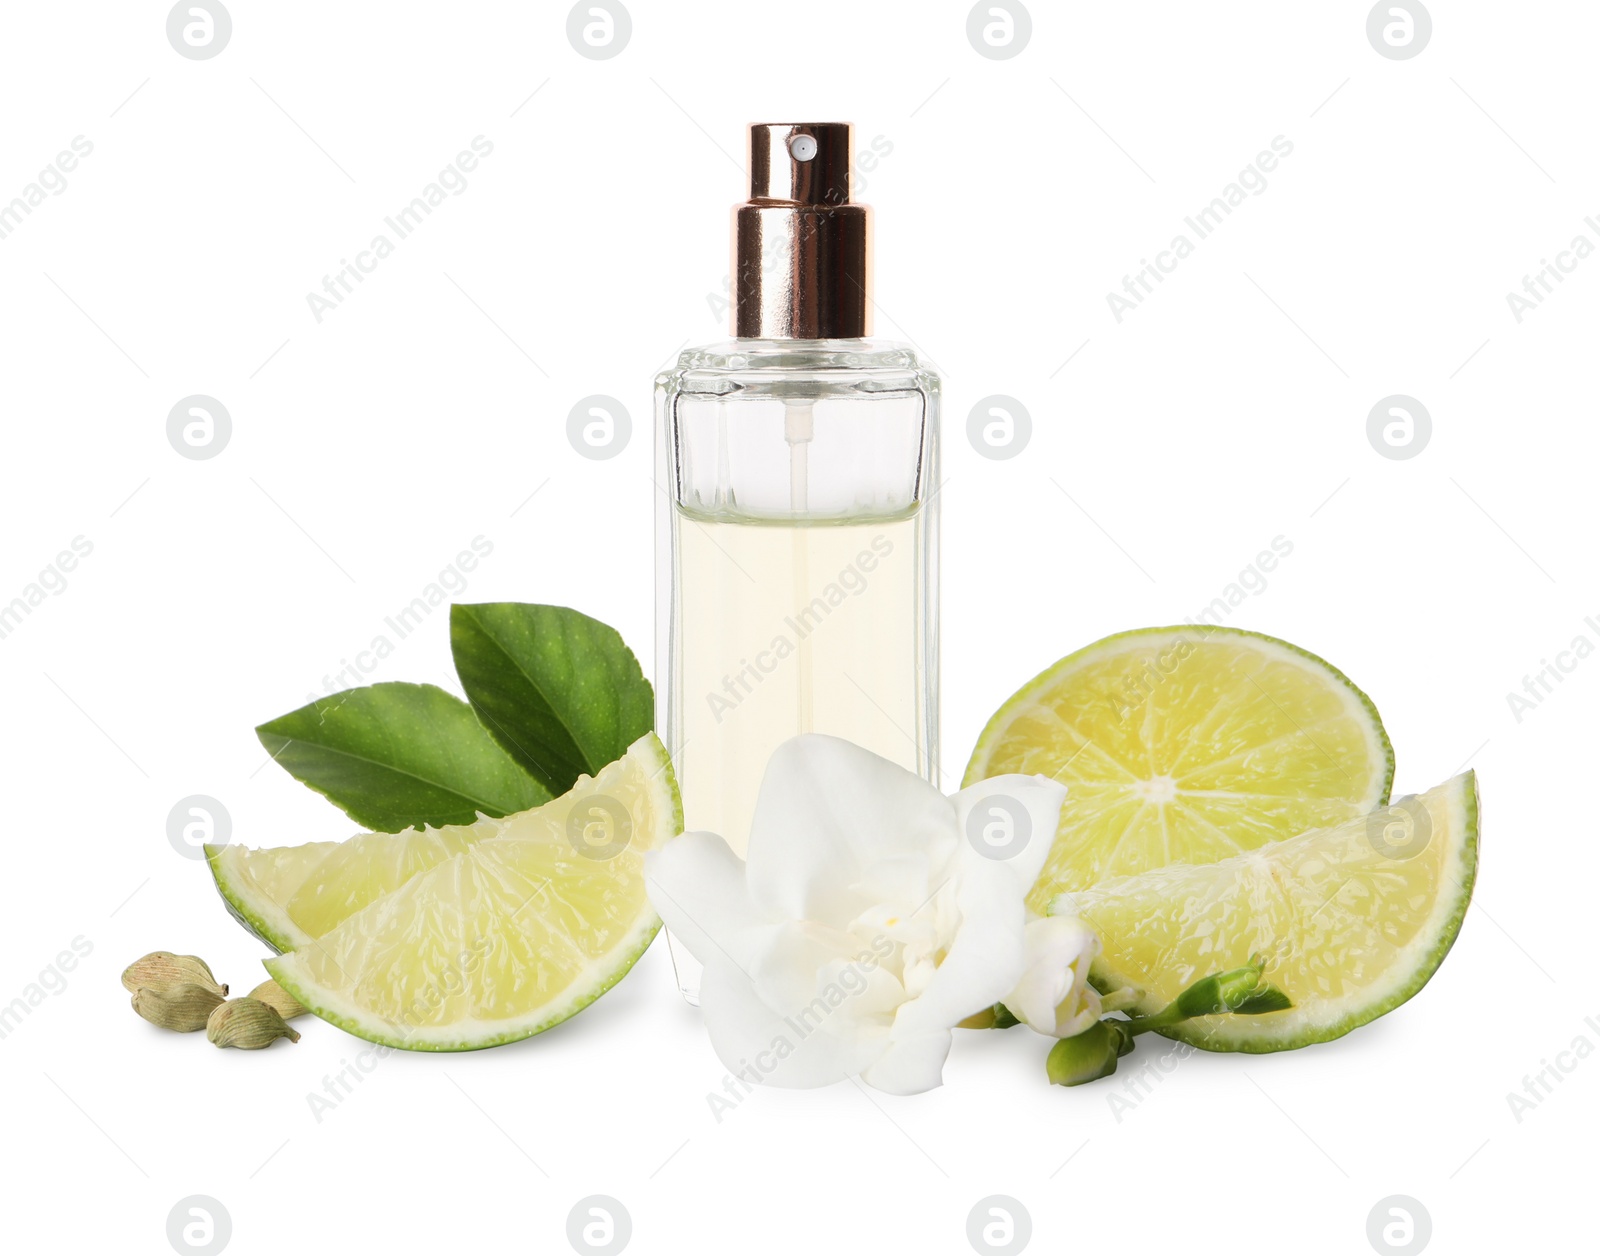 Photo of Bottle of perfume, lime, flower and cardamom on white background